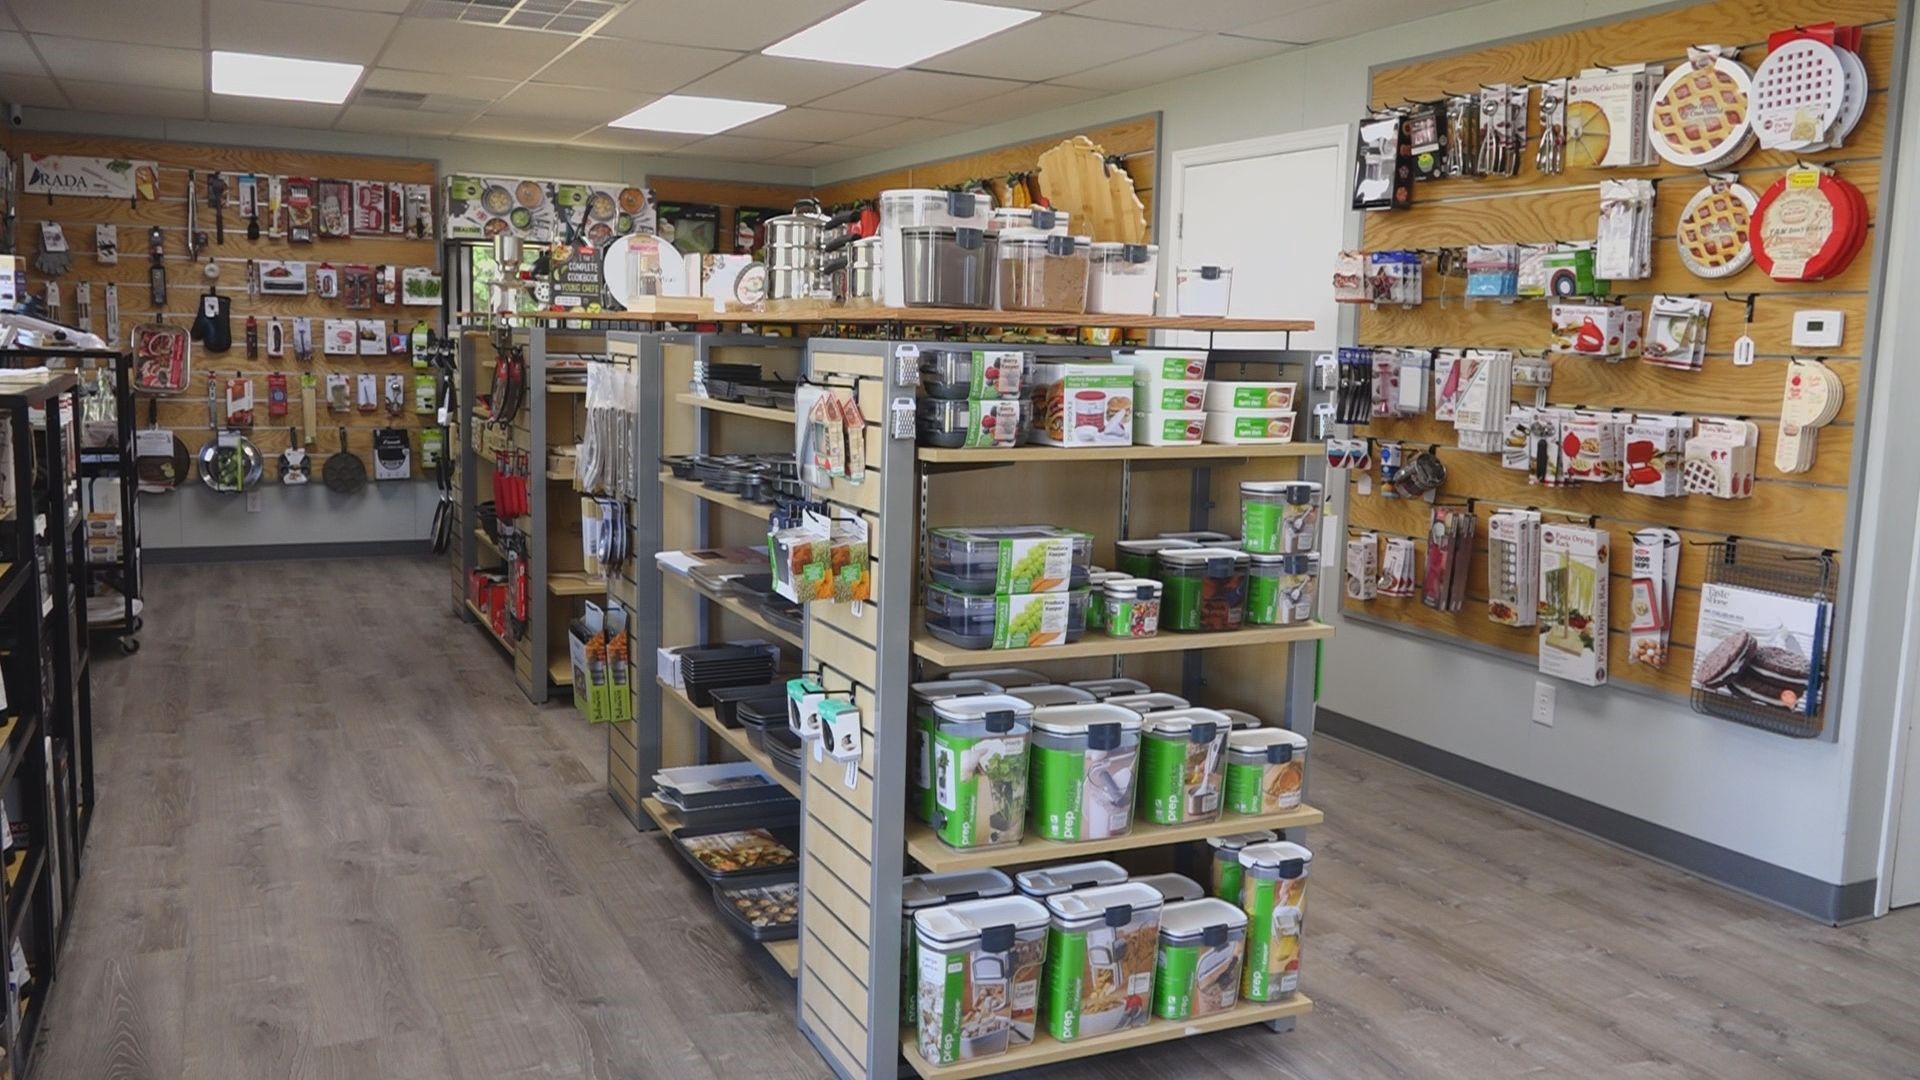 Kooi Housewares has been in business for a decade online. It recently opened its first retail space.